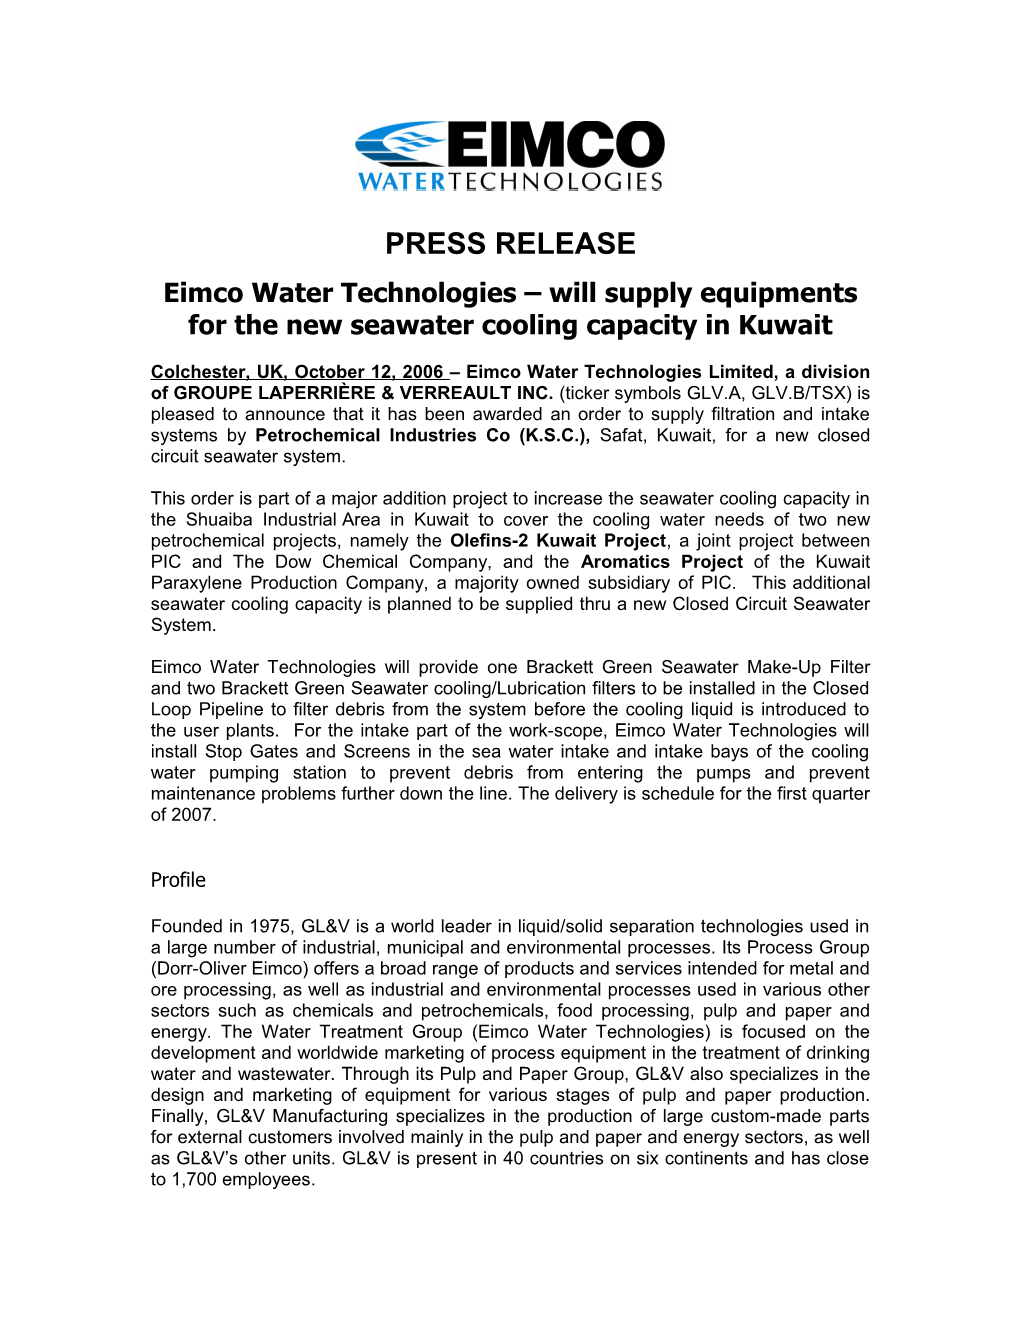 Eimco Water Technologies Will Supply Equipments for the New Seawater Cooling Capacity